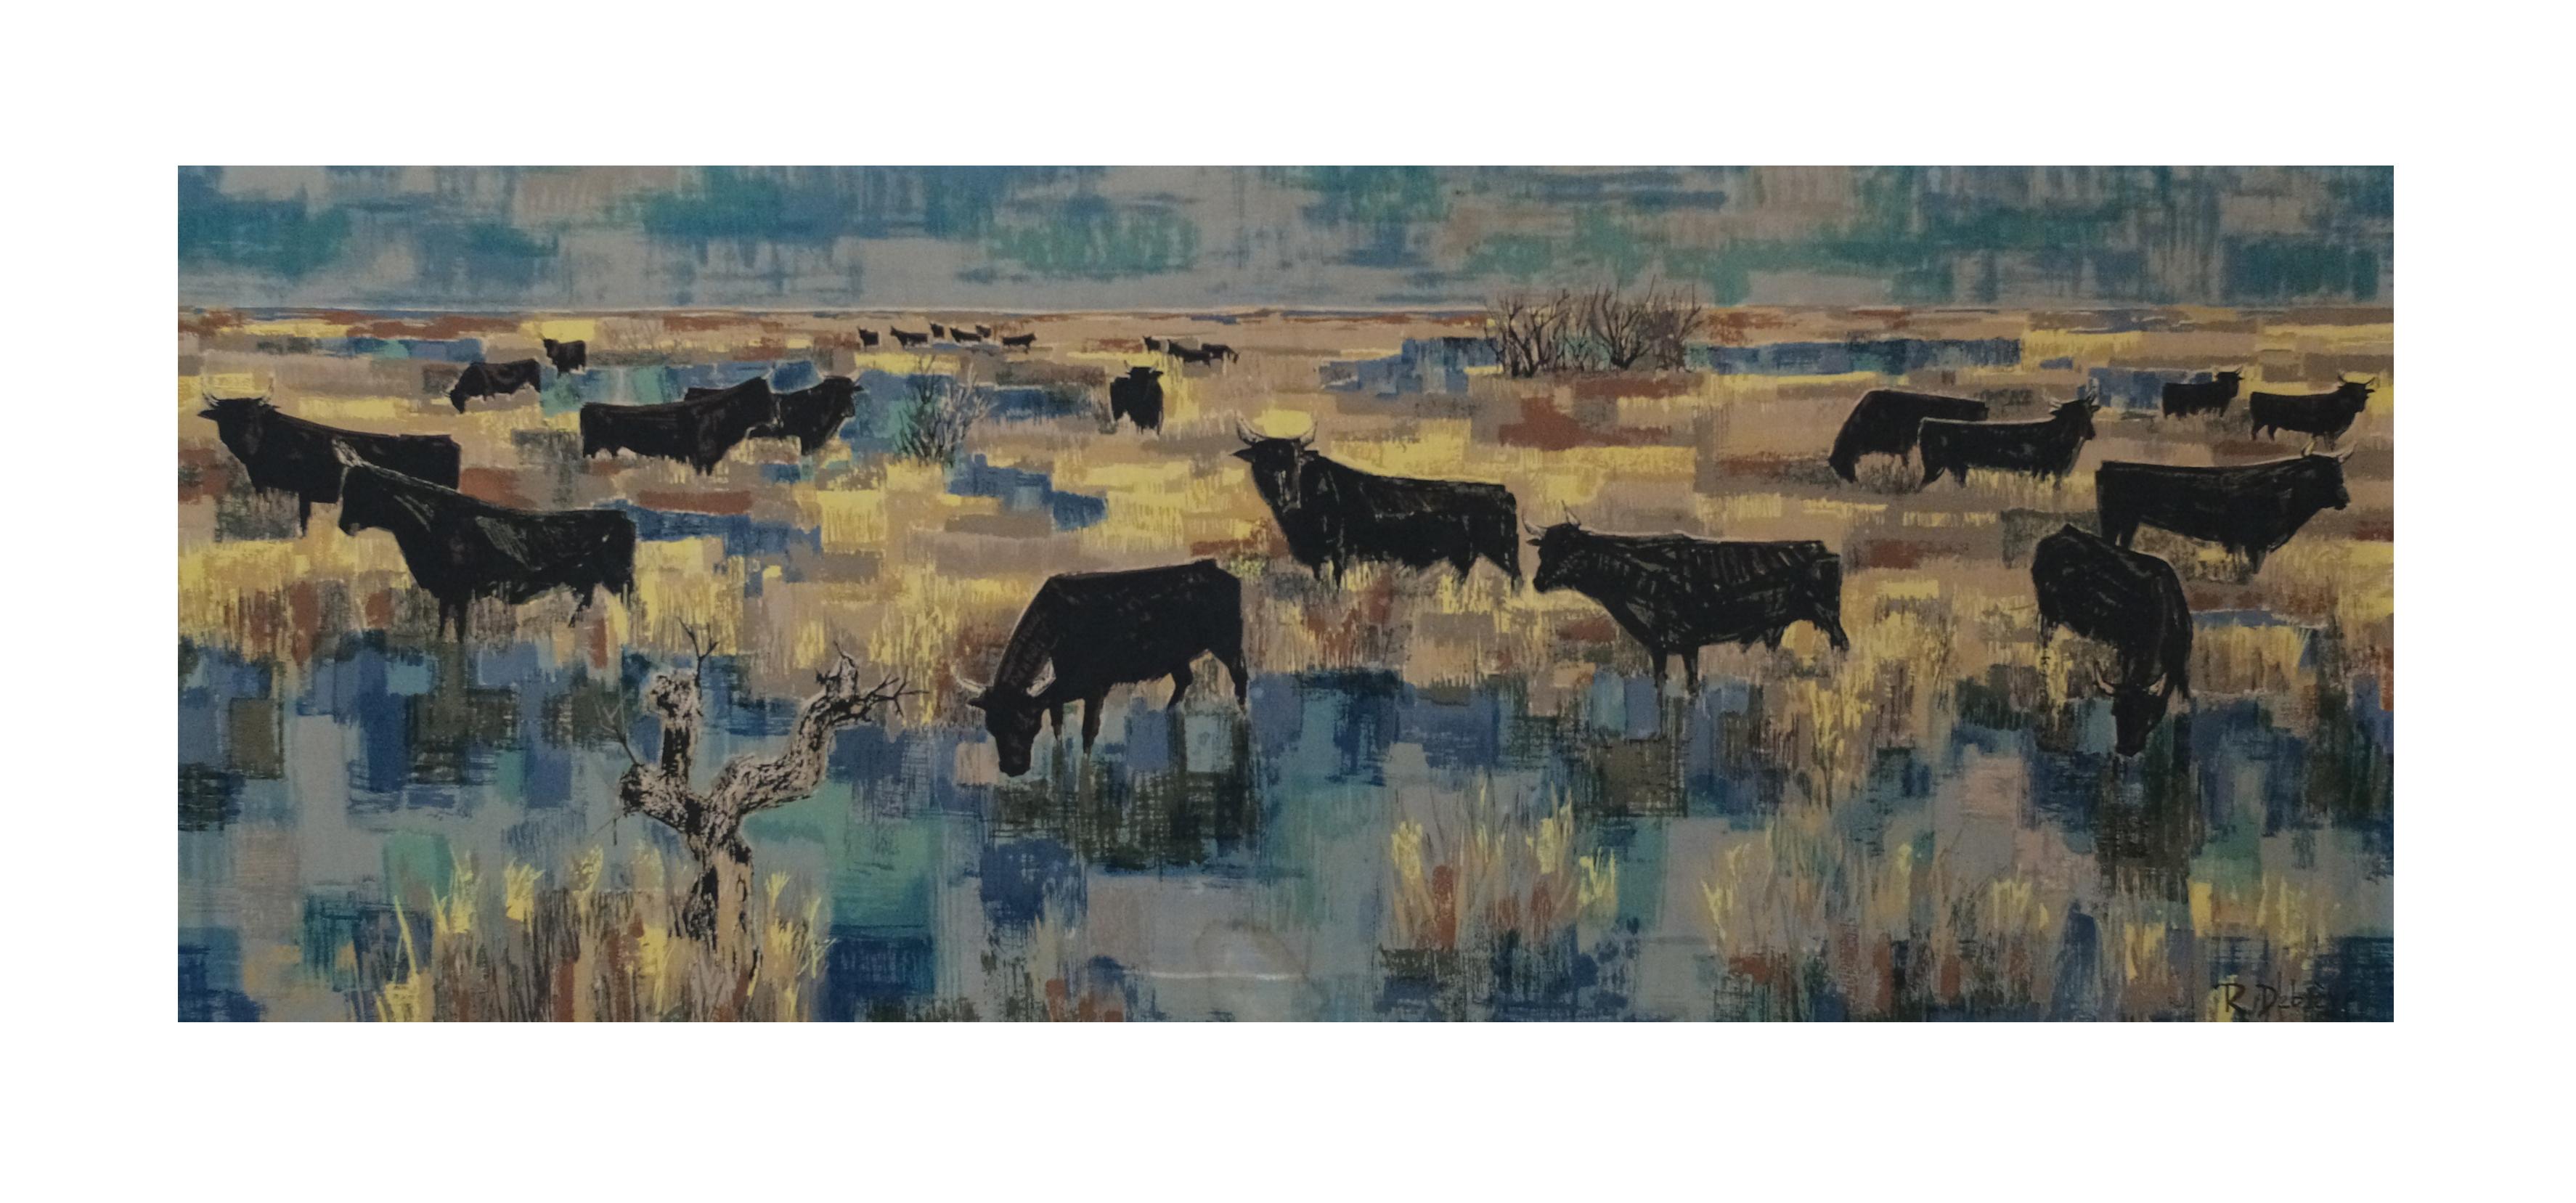 French Stretched Midcentury Cotton Tapestry by Debieve Depicting The Camargue Bulls